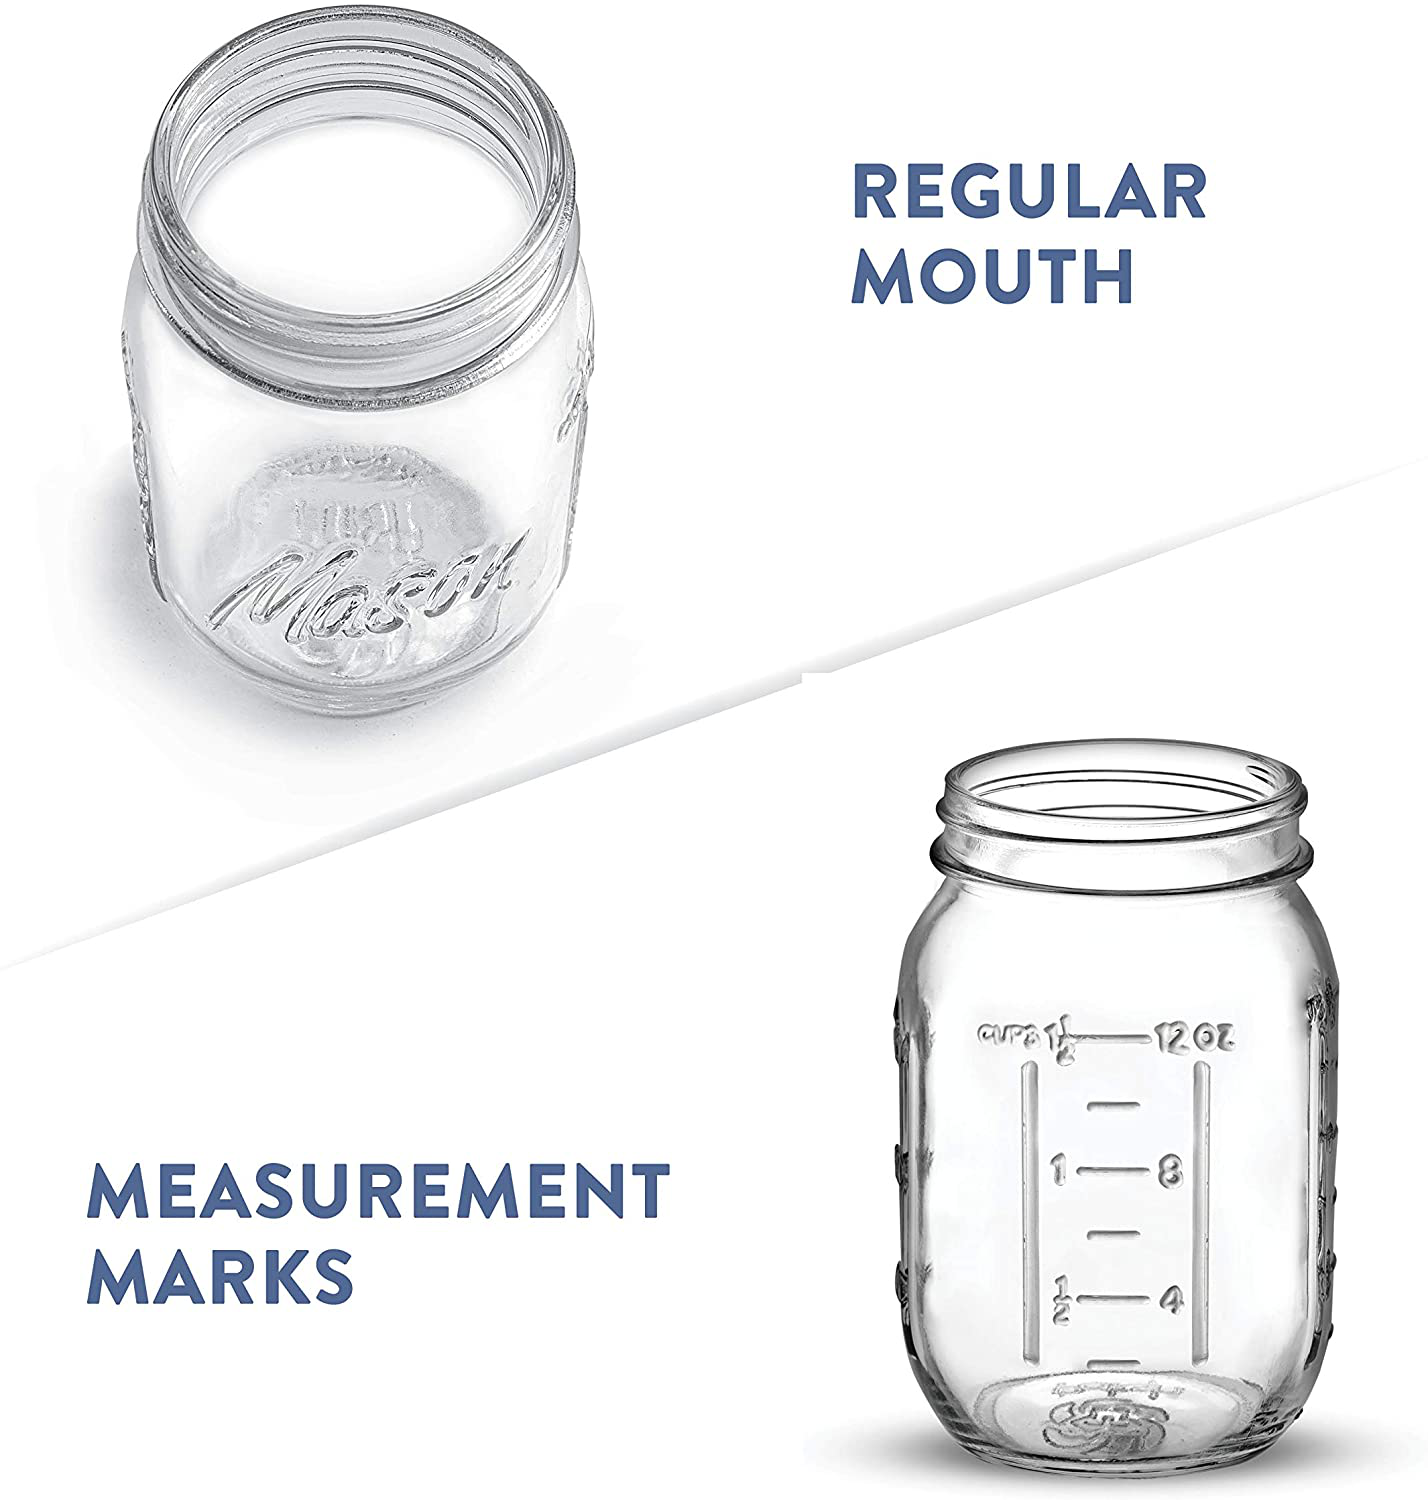 Regular-Mouth Glass Mason Jars, 16-Ounce (6-Pack) Glass Canning Jars with Silver Metal Airtight Lids and Bands with Measurement Marks, for Canning, Preserving, Meal Prep, Overnight Oats, Jam, Jelly,